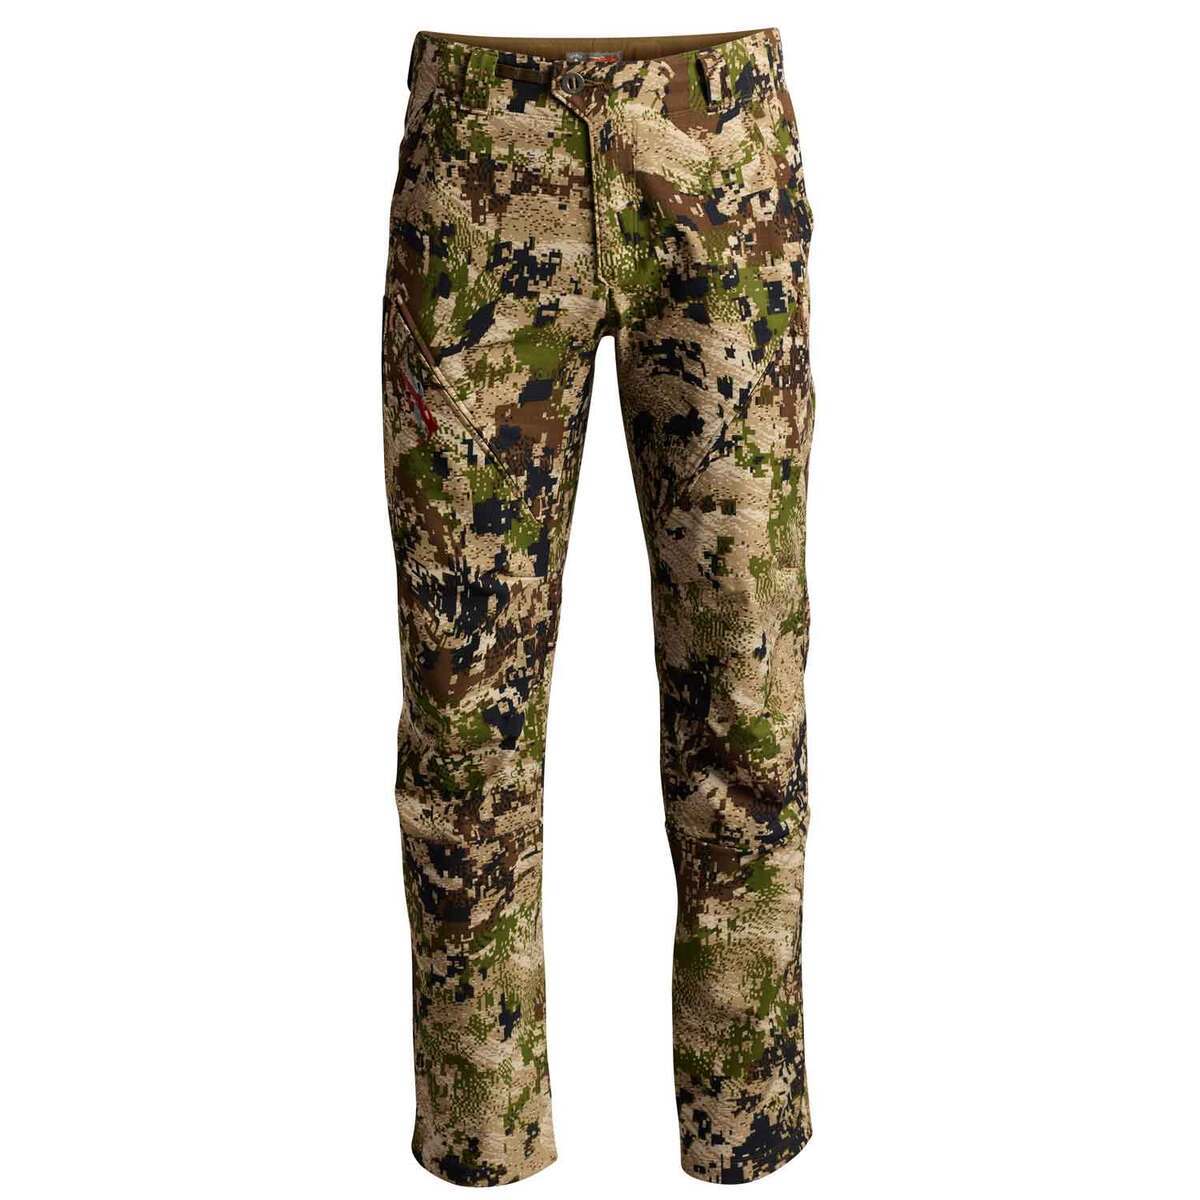 Hunt Monster Hunting Clothes for Men with Fleece lining, Silent Hunting Jacket and Pants